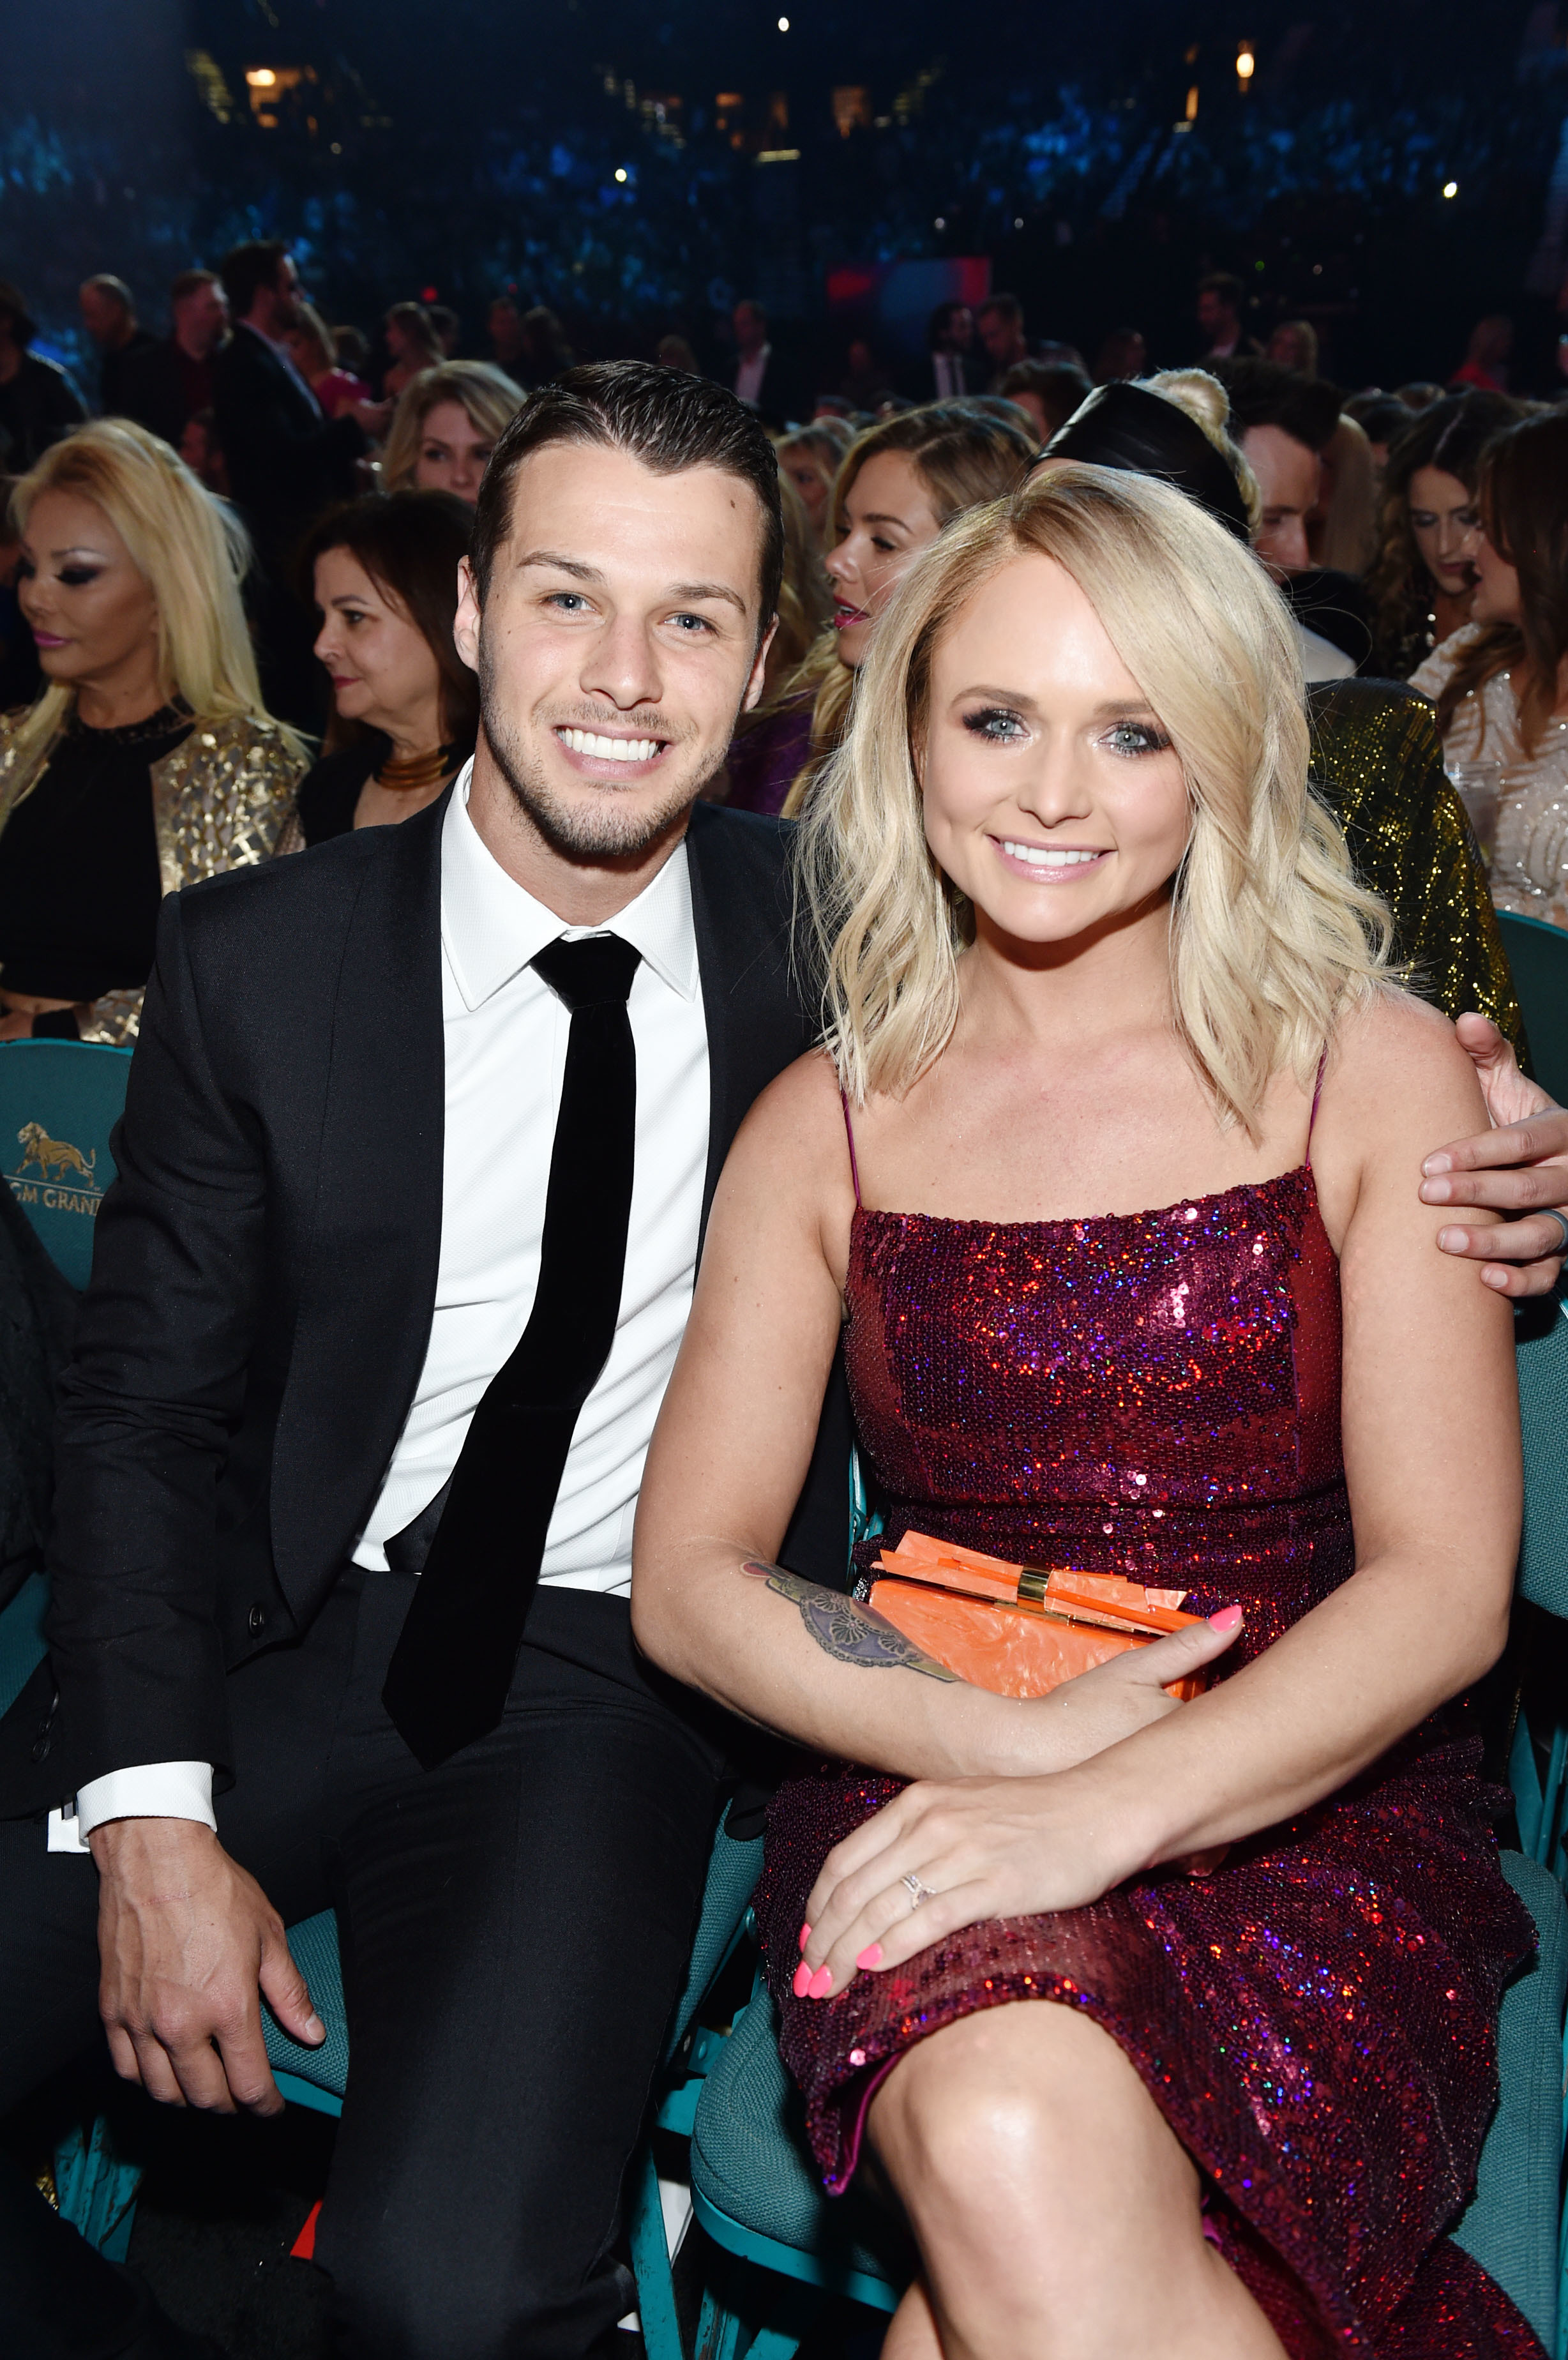 <p><a href="https://www.wonderwall.com/celebrity/profiles/overview/miranda-lambert-1372.article">Miranda Lambert</a> has her Pistol Annies bandmates to thank for introducing her to Brendan McLoughlin, who was an NYPD officer. "I met my husband doing press for the Pistol Annies record, this time last year," the country music star told The New York Times in late October 2019. "Our record came out the day after Halloween, and we [performed on] 'Good Morning America' [on Nov. 2]. My husband was doing security there for the show." Friends and bandmates Ashley Monroe and Angaleena Presley "saw him and knew I might be ready to hang out with someone," added Miranda, who'd broken up with Turnpike Troubadours frontman Evan Felker several months earlier. "They invited him to our show [later that night] behind my back. They plucked him for me... My security guy Tom, he was in on it too. He said to me, 'He's here. And he's pretty.'" <a href="https://www.wonderwall.com/news/miranda-lambert-wedding-leads-big-changes-police-officer-husband-brendan-mcloughlin-job-reassigned-nypd-3018514.article">Miranda quietly married Brendan</a> in Tennessee less than three months later.</p>